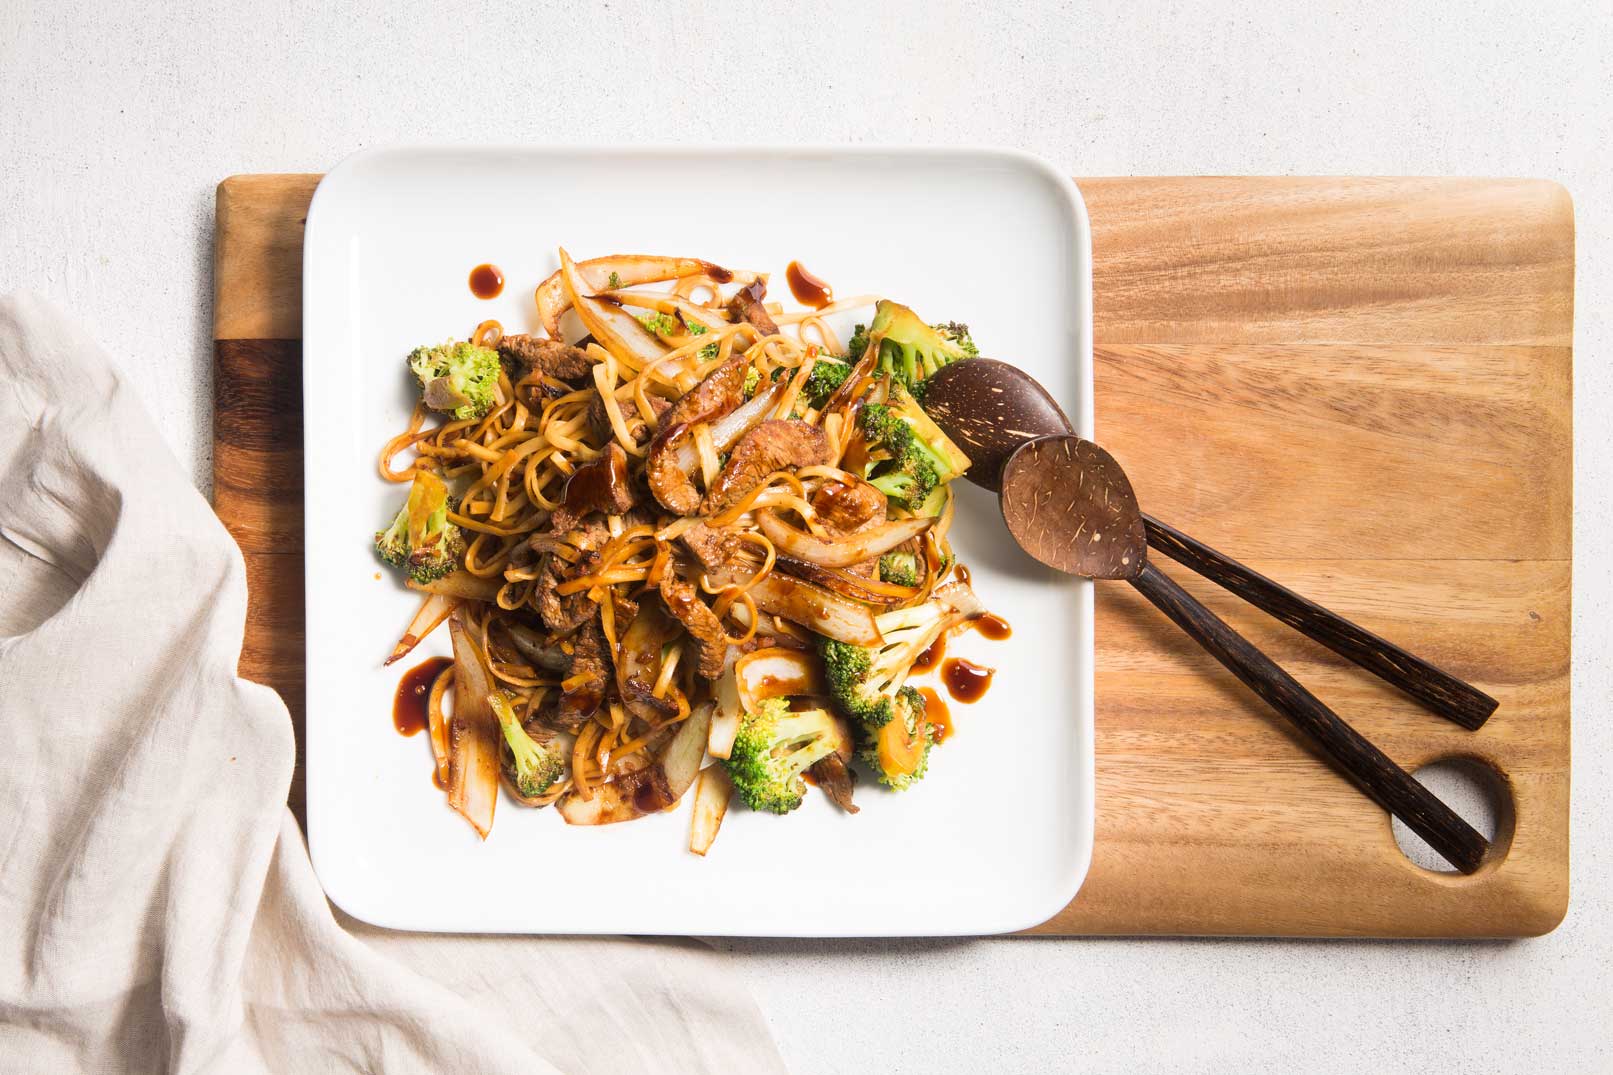 Image of beef and broccoli stir fry on a white square plate sitting on a wooden chopping board with wooden serving spoons.